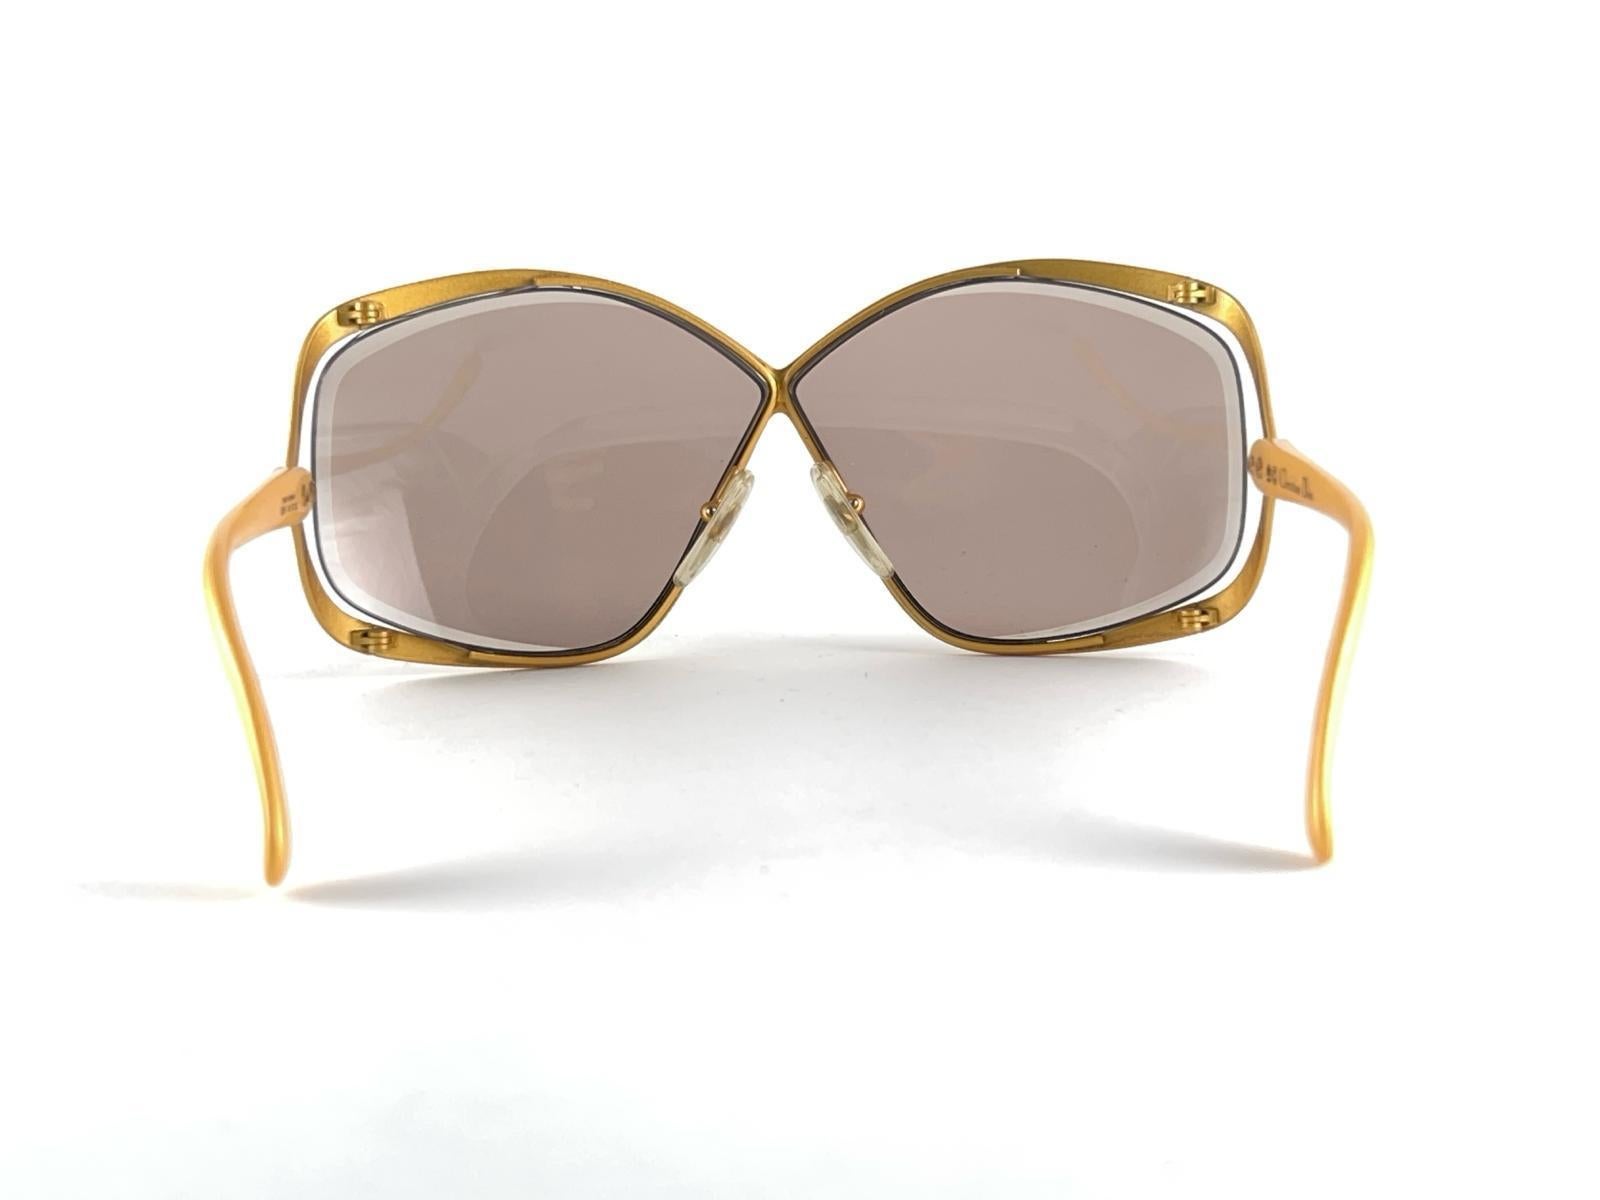 New Vintage Christian Dior 2056 40 Butterfly Mustard Sunglasses Made in Germany For Sale 9